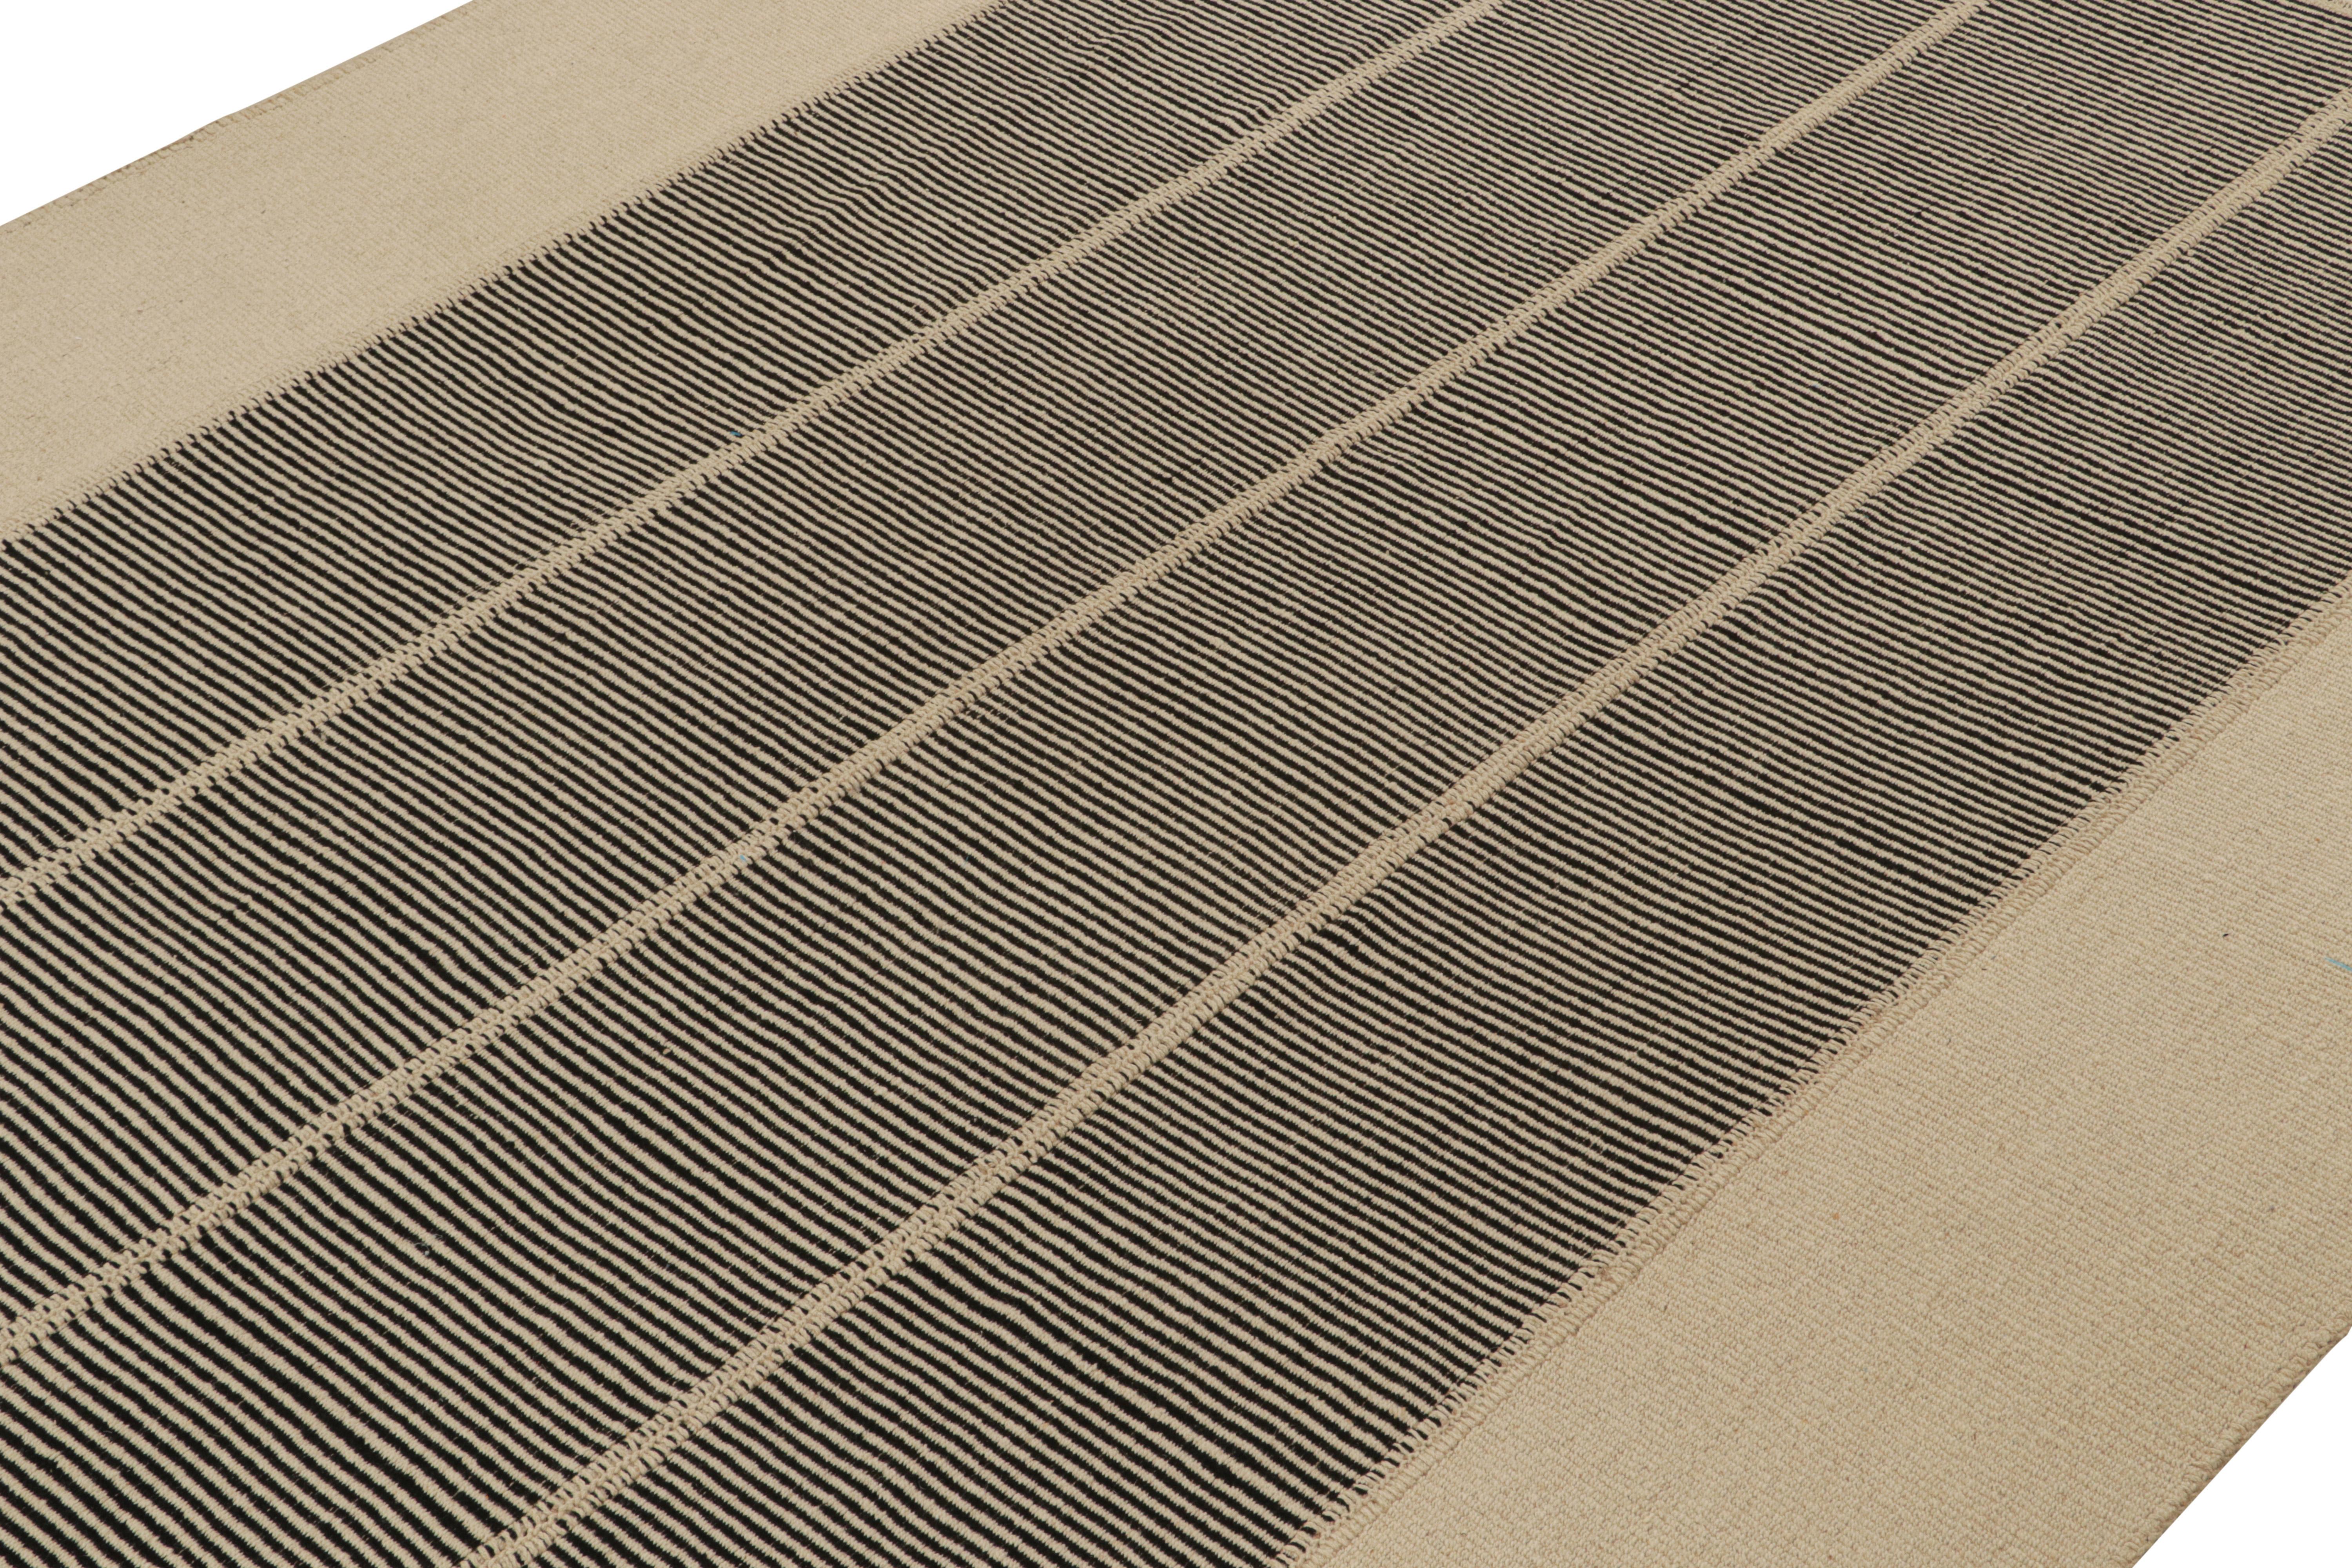 Persian Rug & Kilim’s Contemporary Kilim Rug in Beige and Black Stripes For Sale